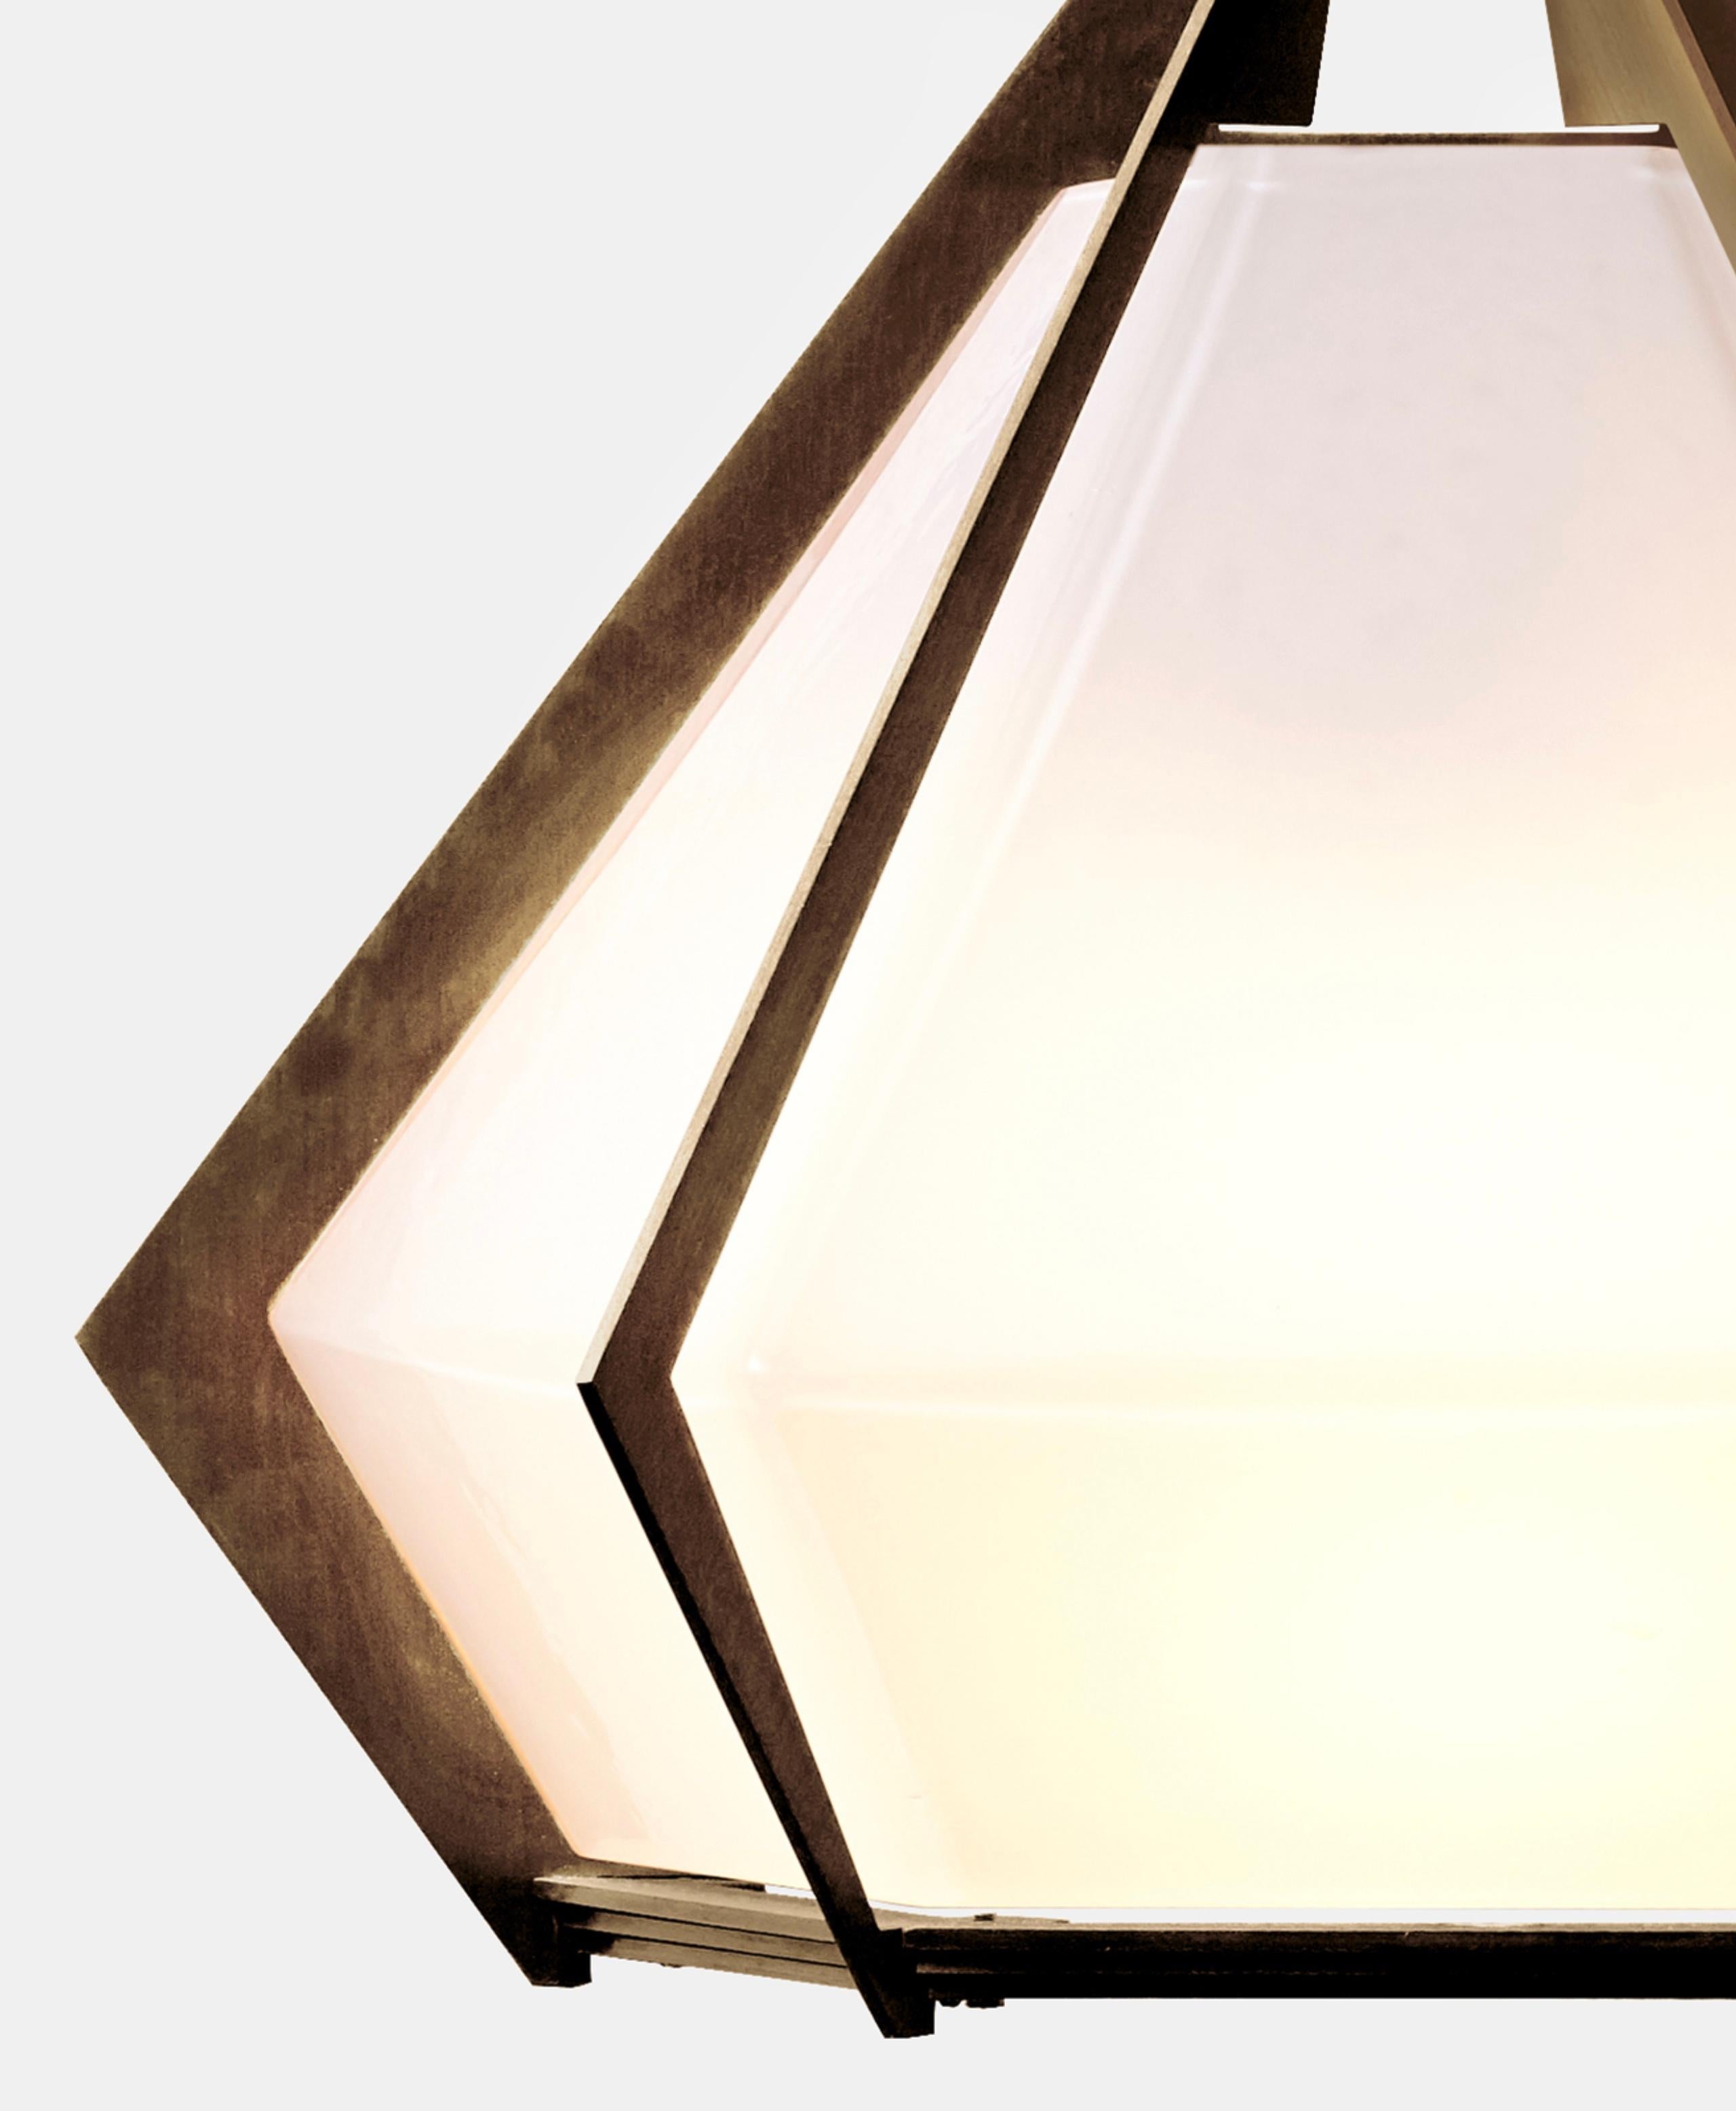 The Harlow Wall Sconce offers an elegant starburst of light that reflects and refracts through its mold-blown glass shade. A sparkling prism, the Harlow Wall Sconce is directly inspired by the world of jewelry with its metallic frame encasing a